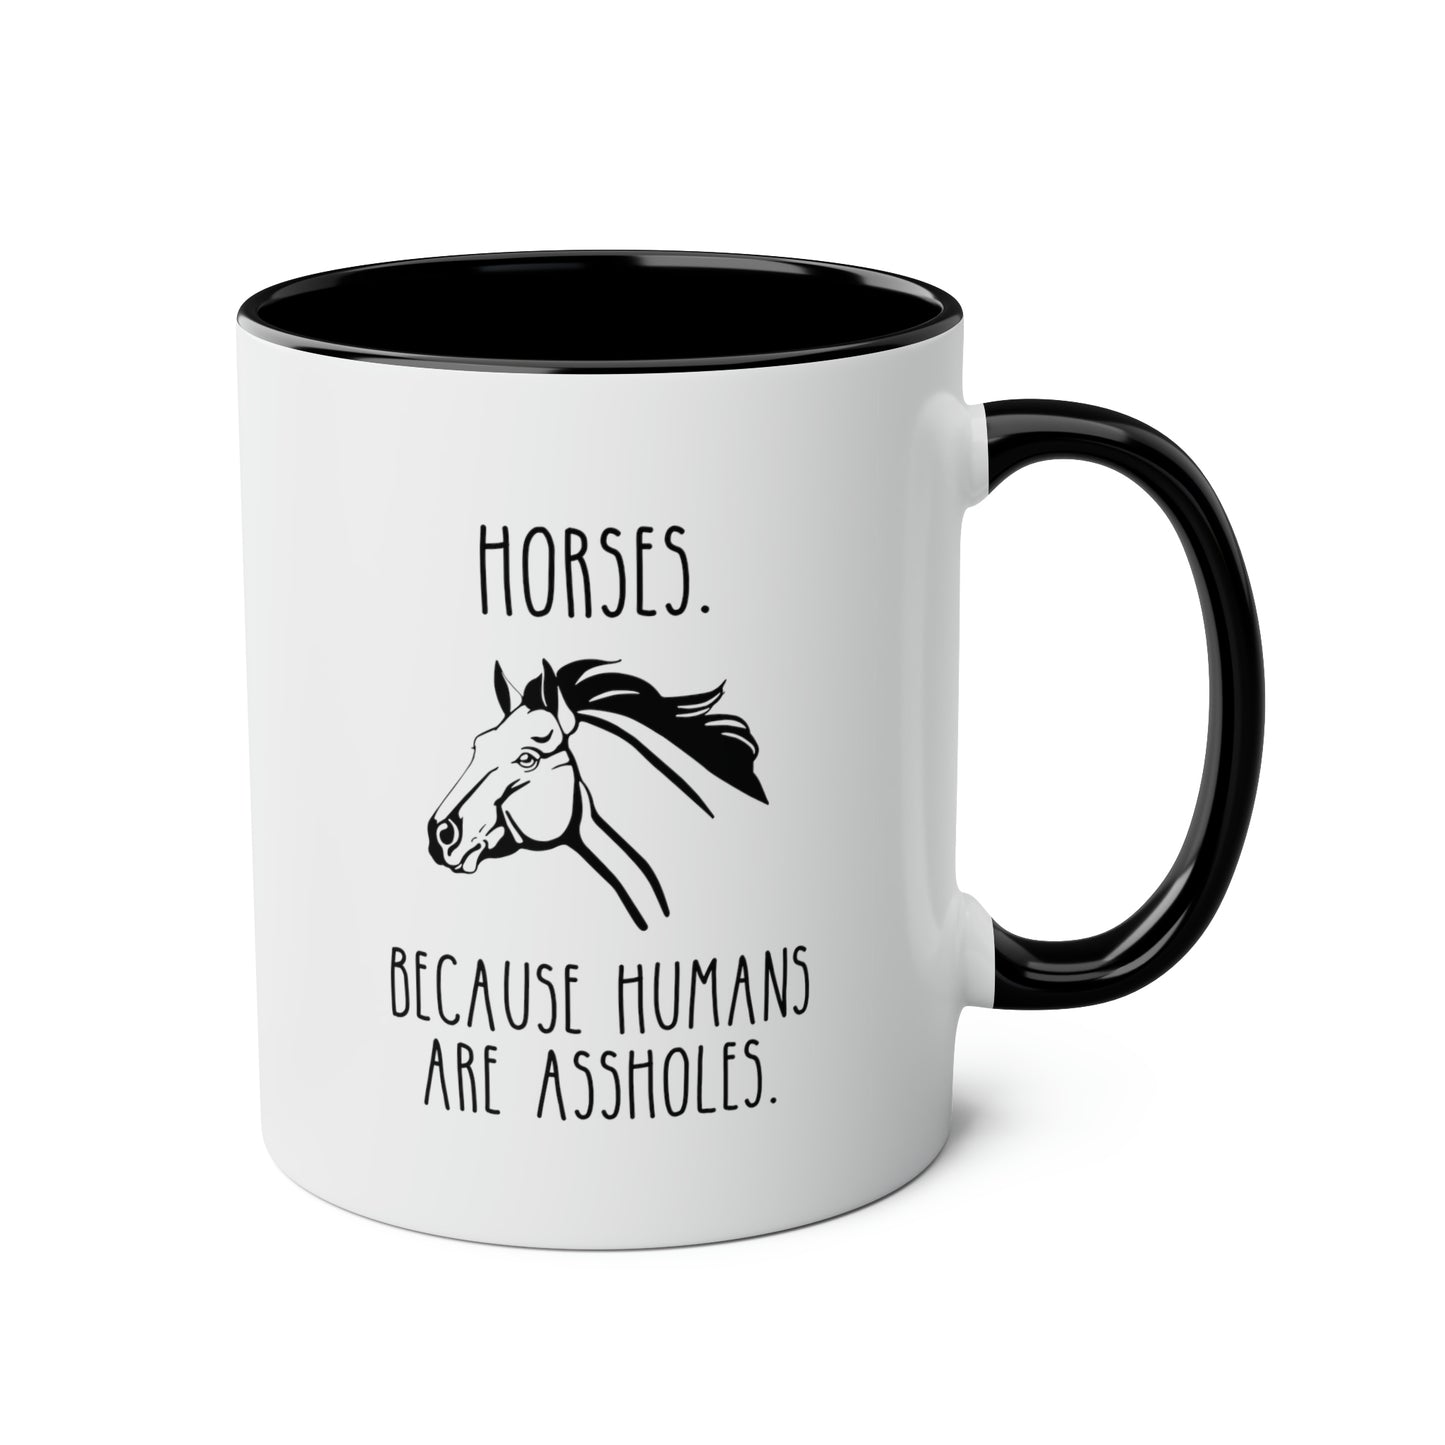 Horses Because Humans Are Assholes 11oz white with black accent funny large coffee mug gift for owner horse riding pony equestrian waveywares wavey wares wavywares wavy wares